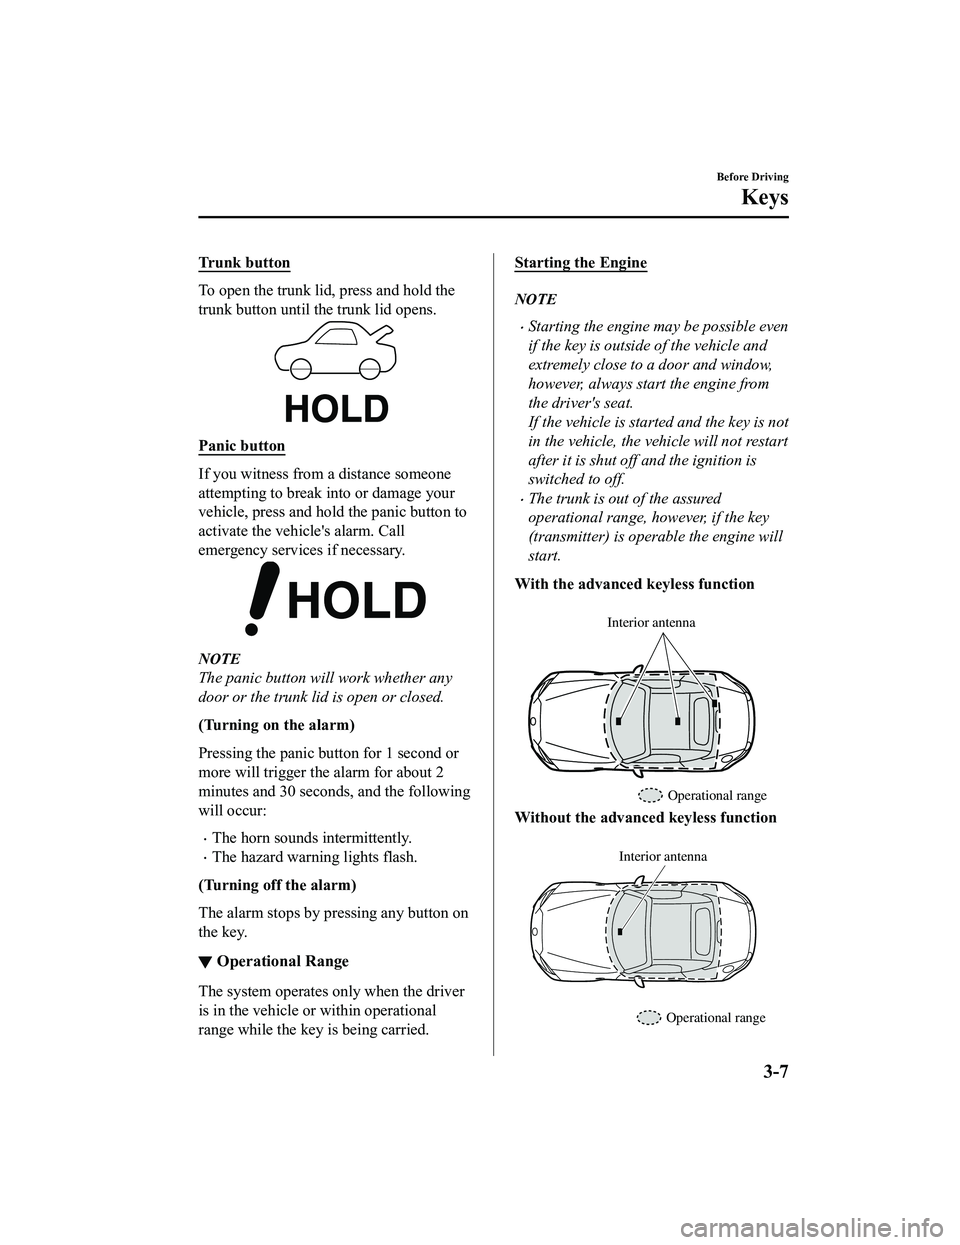 MAZDA MODEL MX-5 MIATA 2018  Owners Manual Trunk button
To open the trunk lid, press and hold the
trunk button until the trunk lid opens.
Panic button
If you witness from a distance someone
attempting to break into or damage your
vehicle, pres